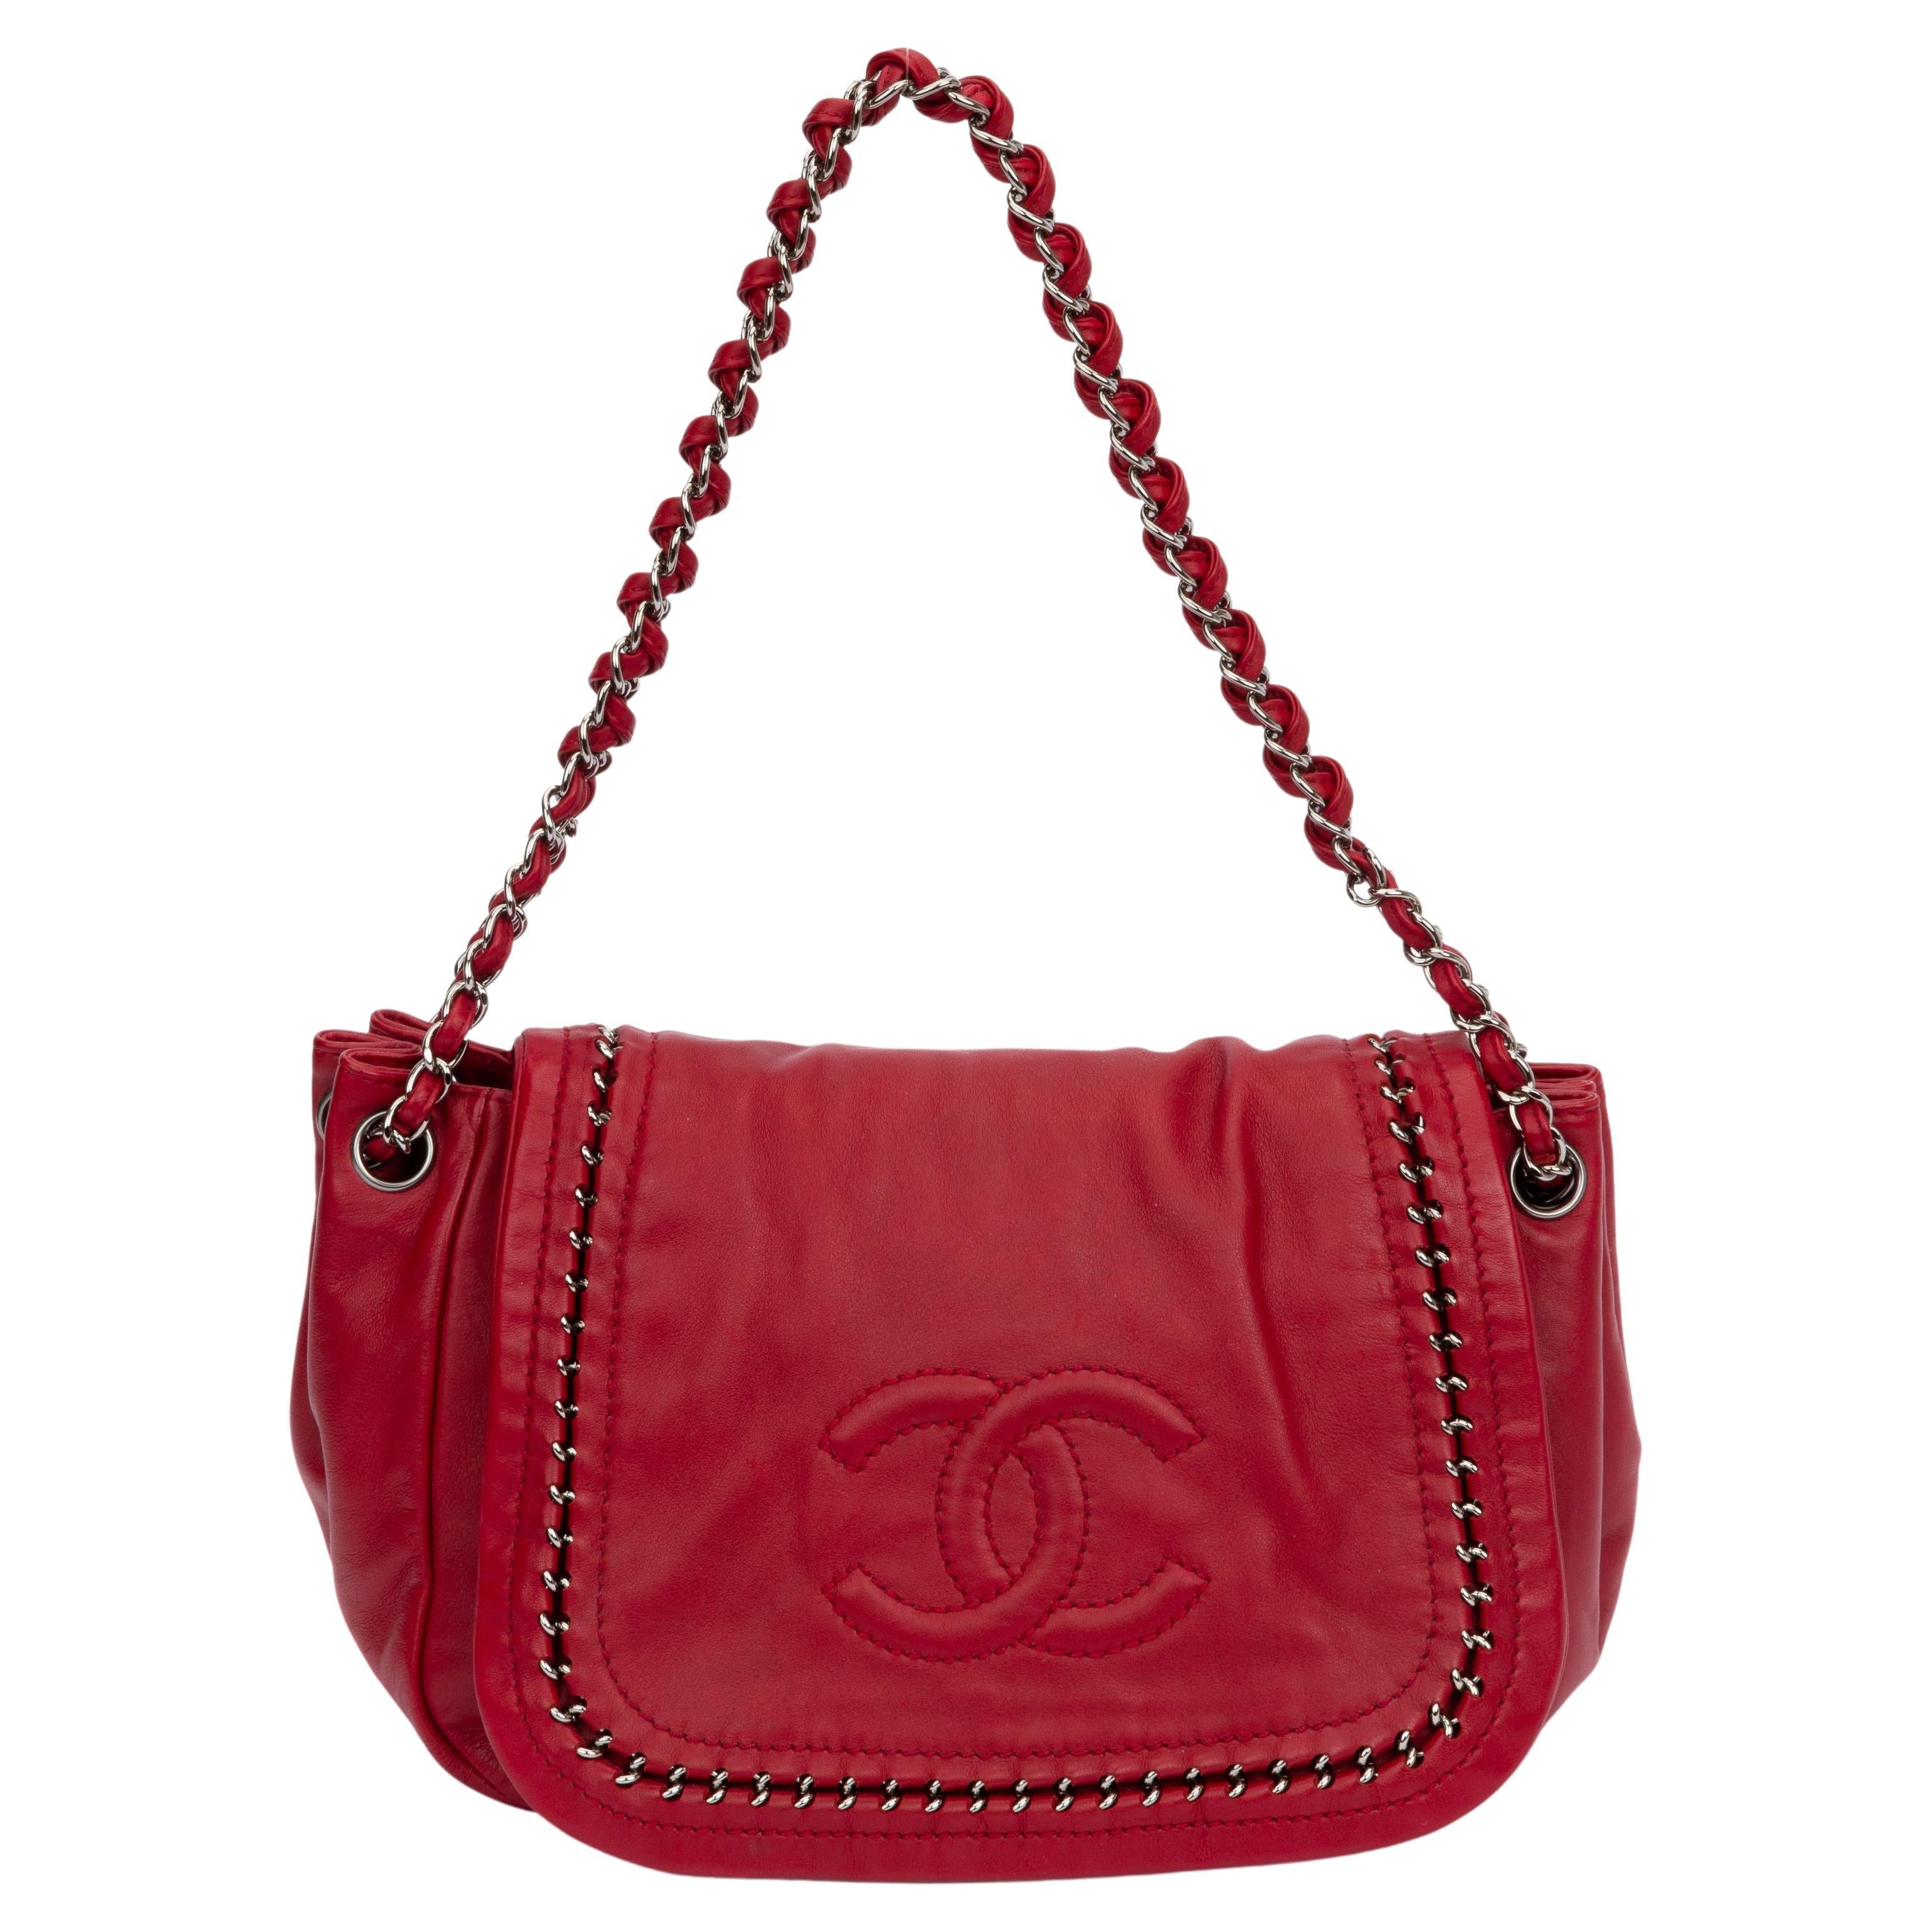 Chanel Cherry Red Inlay Chain Handbag For Sale